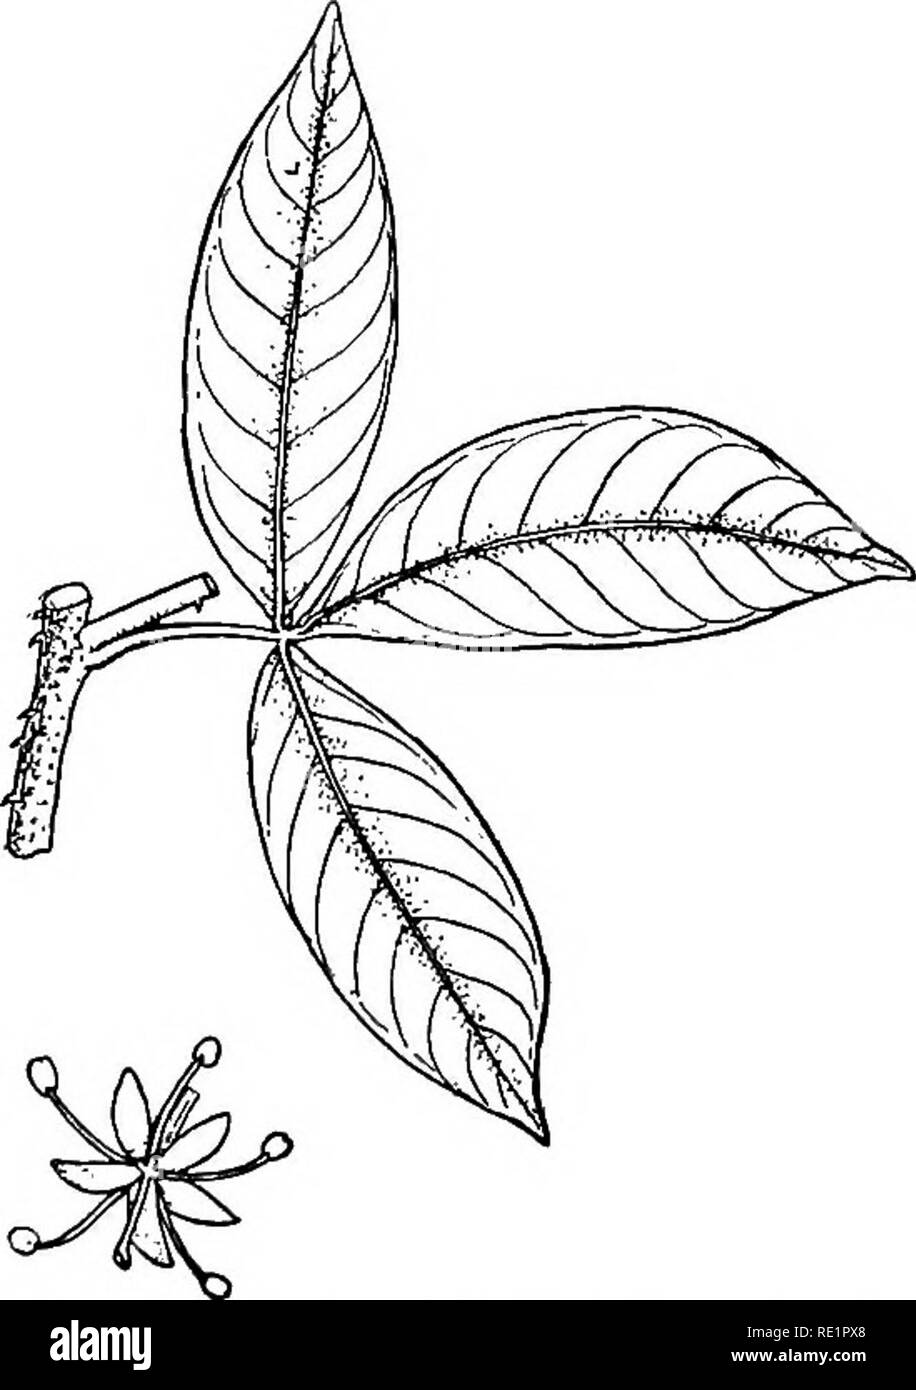 . A manual of Indian botany. Botany. CLASSIFICATION medica, C. Aurantium, and C. decummia or batabi- nebu), usually characterized by winged and jointed petioles (see fig. 29 (4)); bael or Wood-apple {^gle Marmelos), kath-bael or Elephant-apple (Feronia Elephantuvi), kamini-phul {Murraya exotica)^ and ash-shaorha {Glycosmis pentaphylld). The twigs of the last-named plant are largely used as a kind of tooth-brush all over northern India. Todalia aculeata (fig. 173) is a shrub found in Orissa and Khasi Hills, armed with pe- culiar spines. The seeds of nebu are often poly-embryonic. Nat. Order 31. Stock Photo